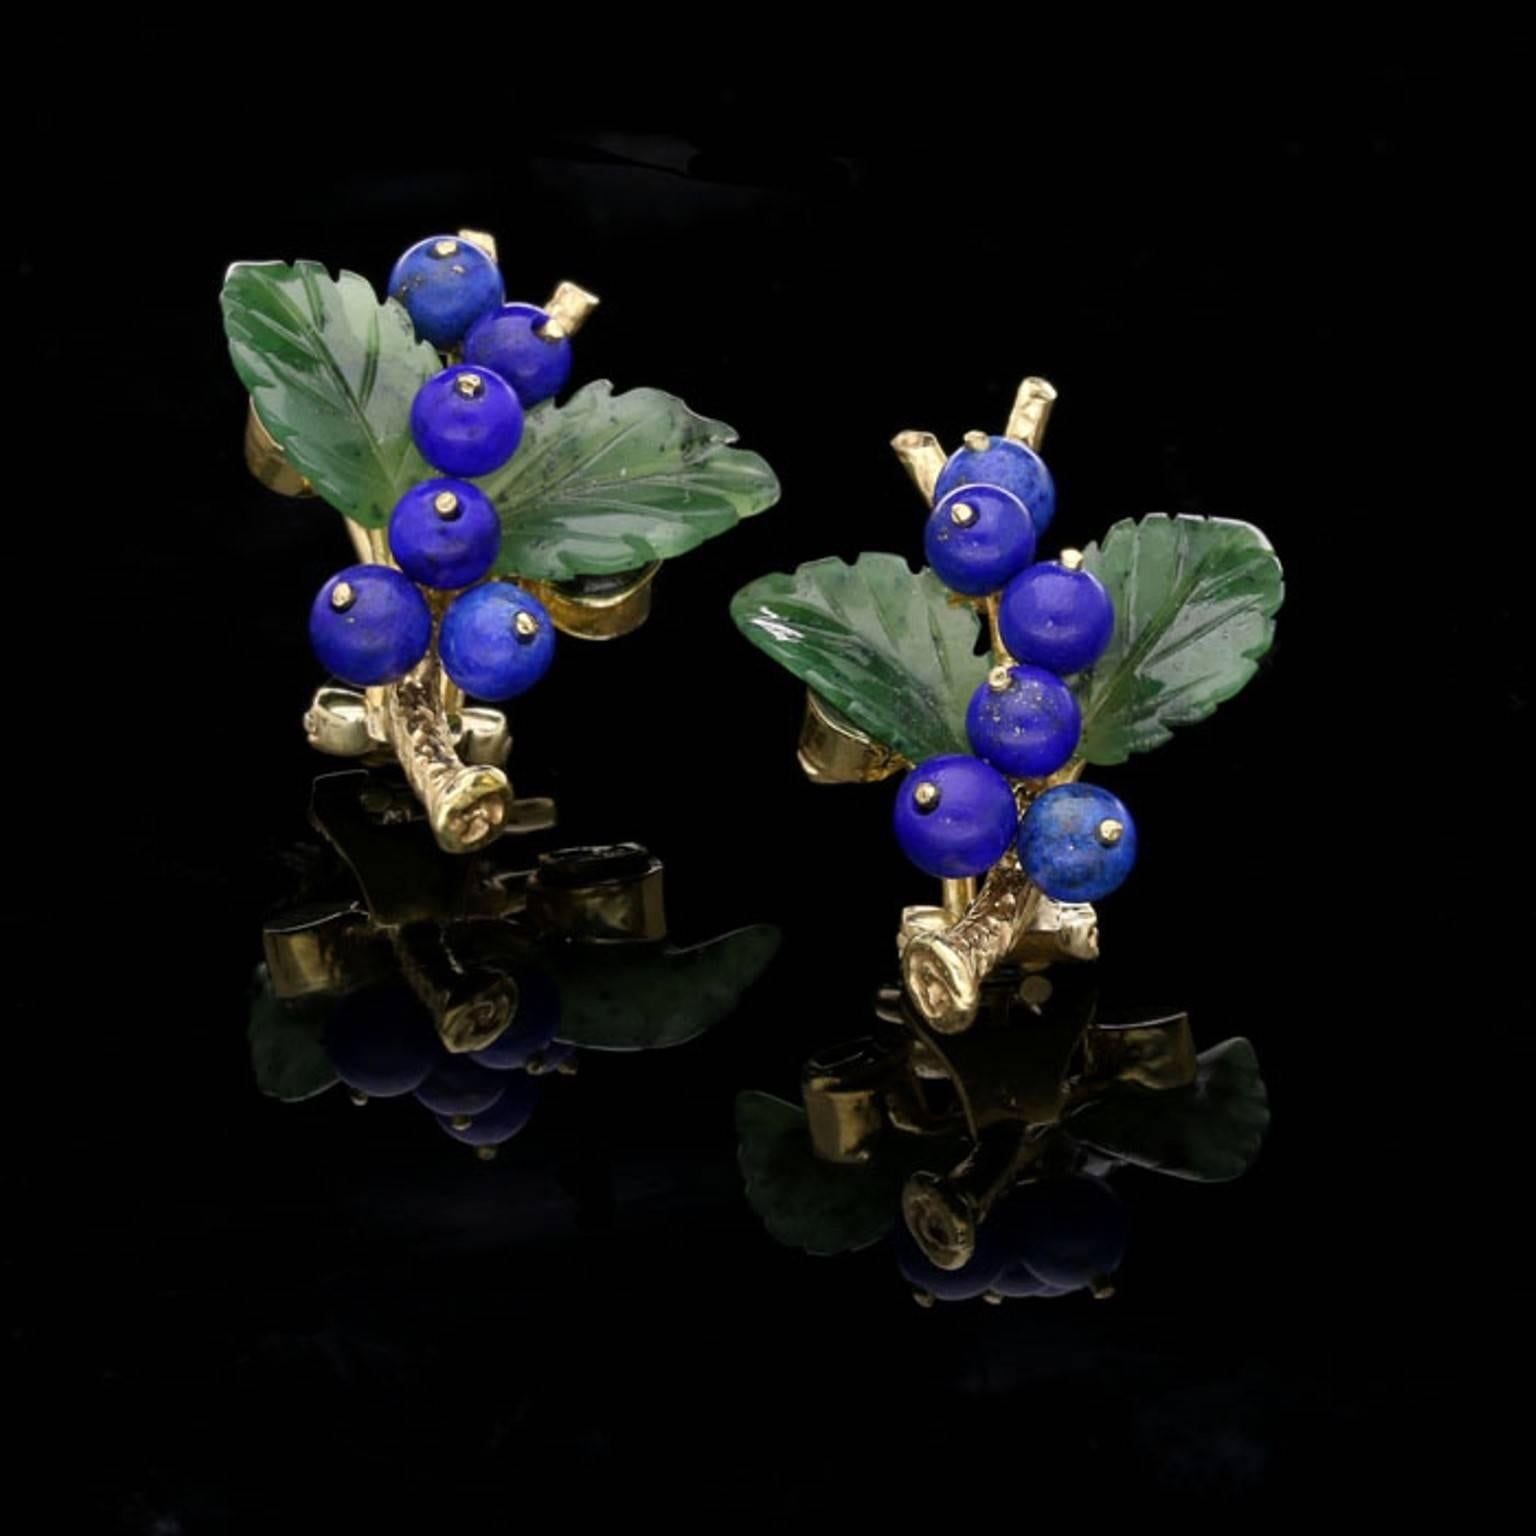 A sweet pair of gold and carved gemstone earrings by Paltscho c.1950s, each earring designed as a forked branch in textured 18ct yellow gold adorned with a pair of carved nephrite-jade leaves and six round berries fashioned from bright blue beads of